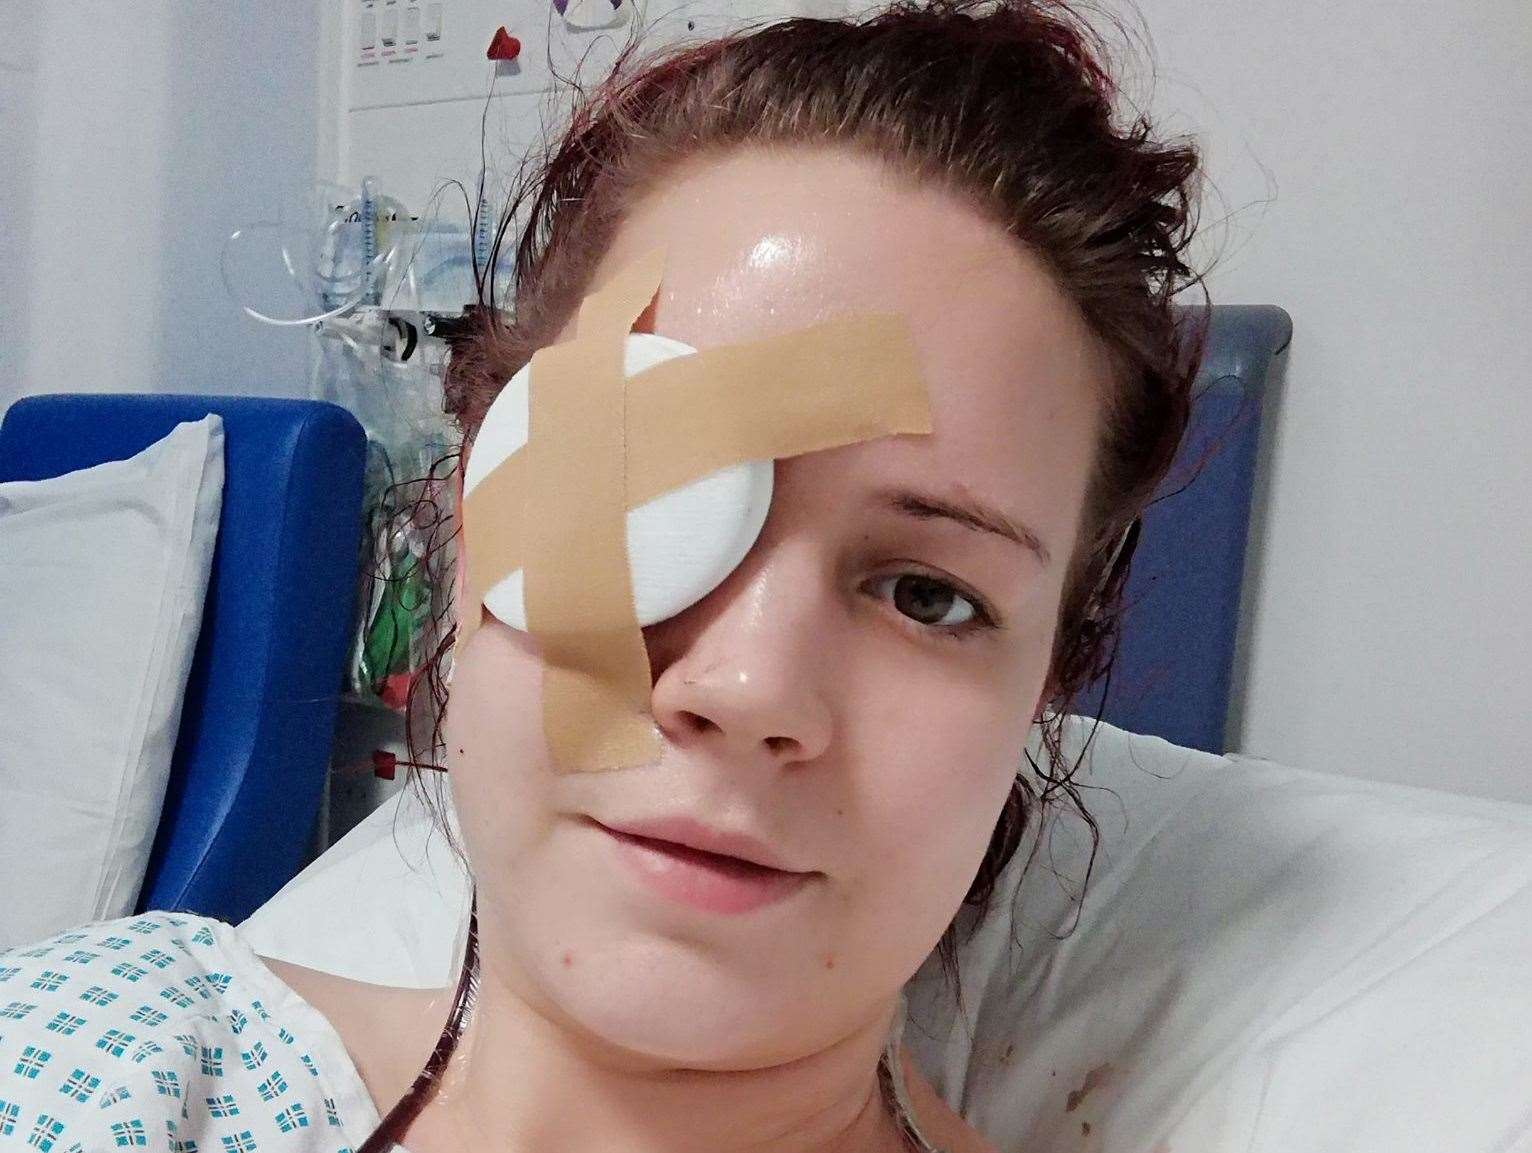 Toni Crews following major surgery after her second diagnosis in January 2019